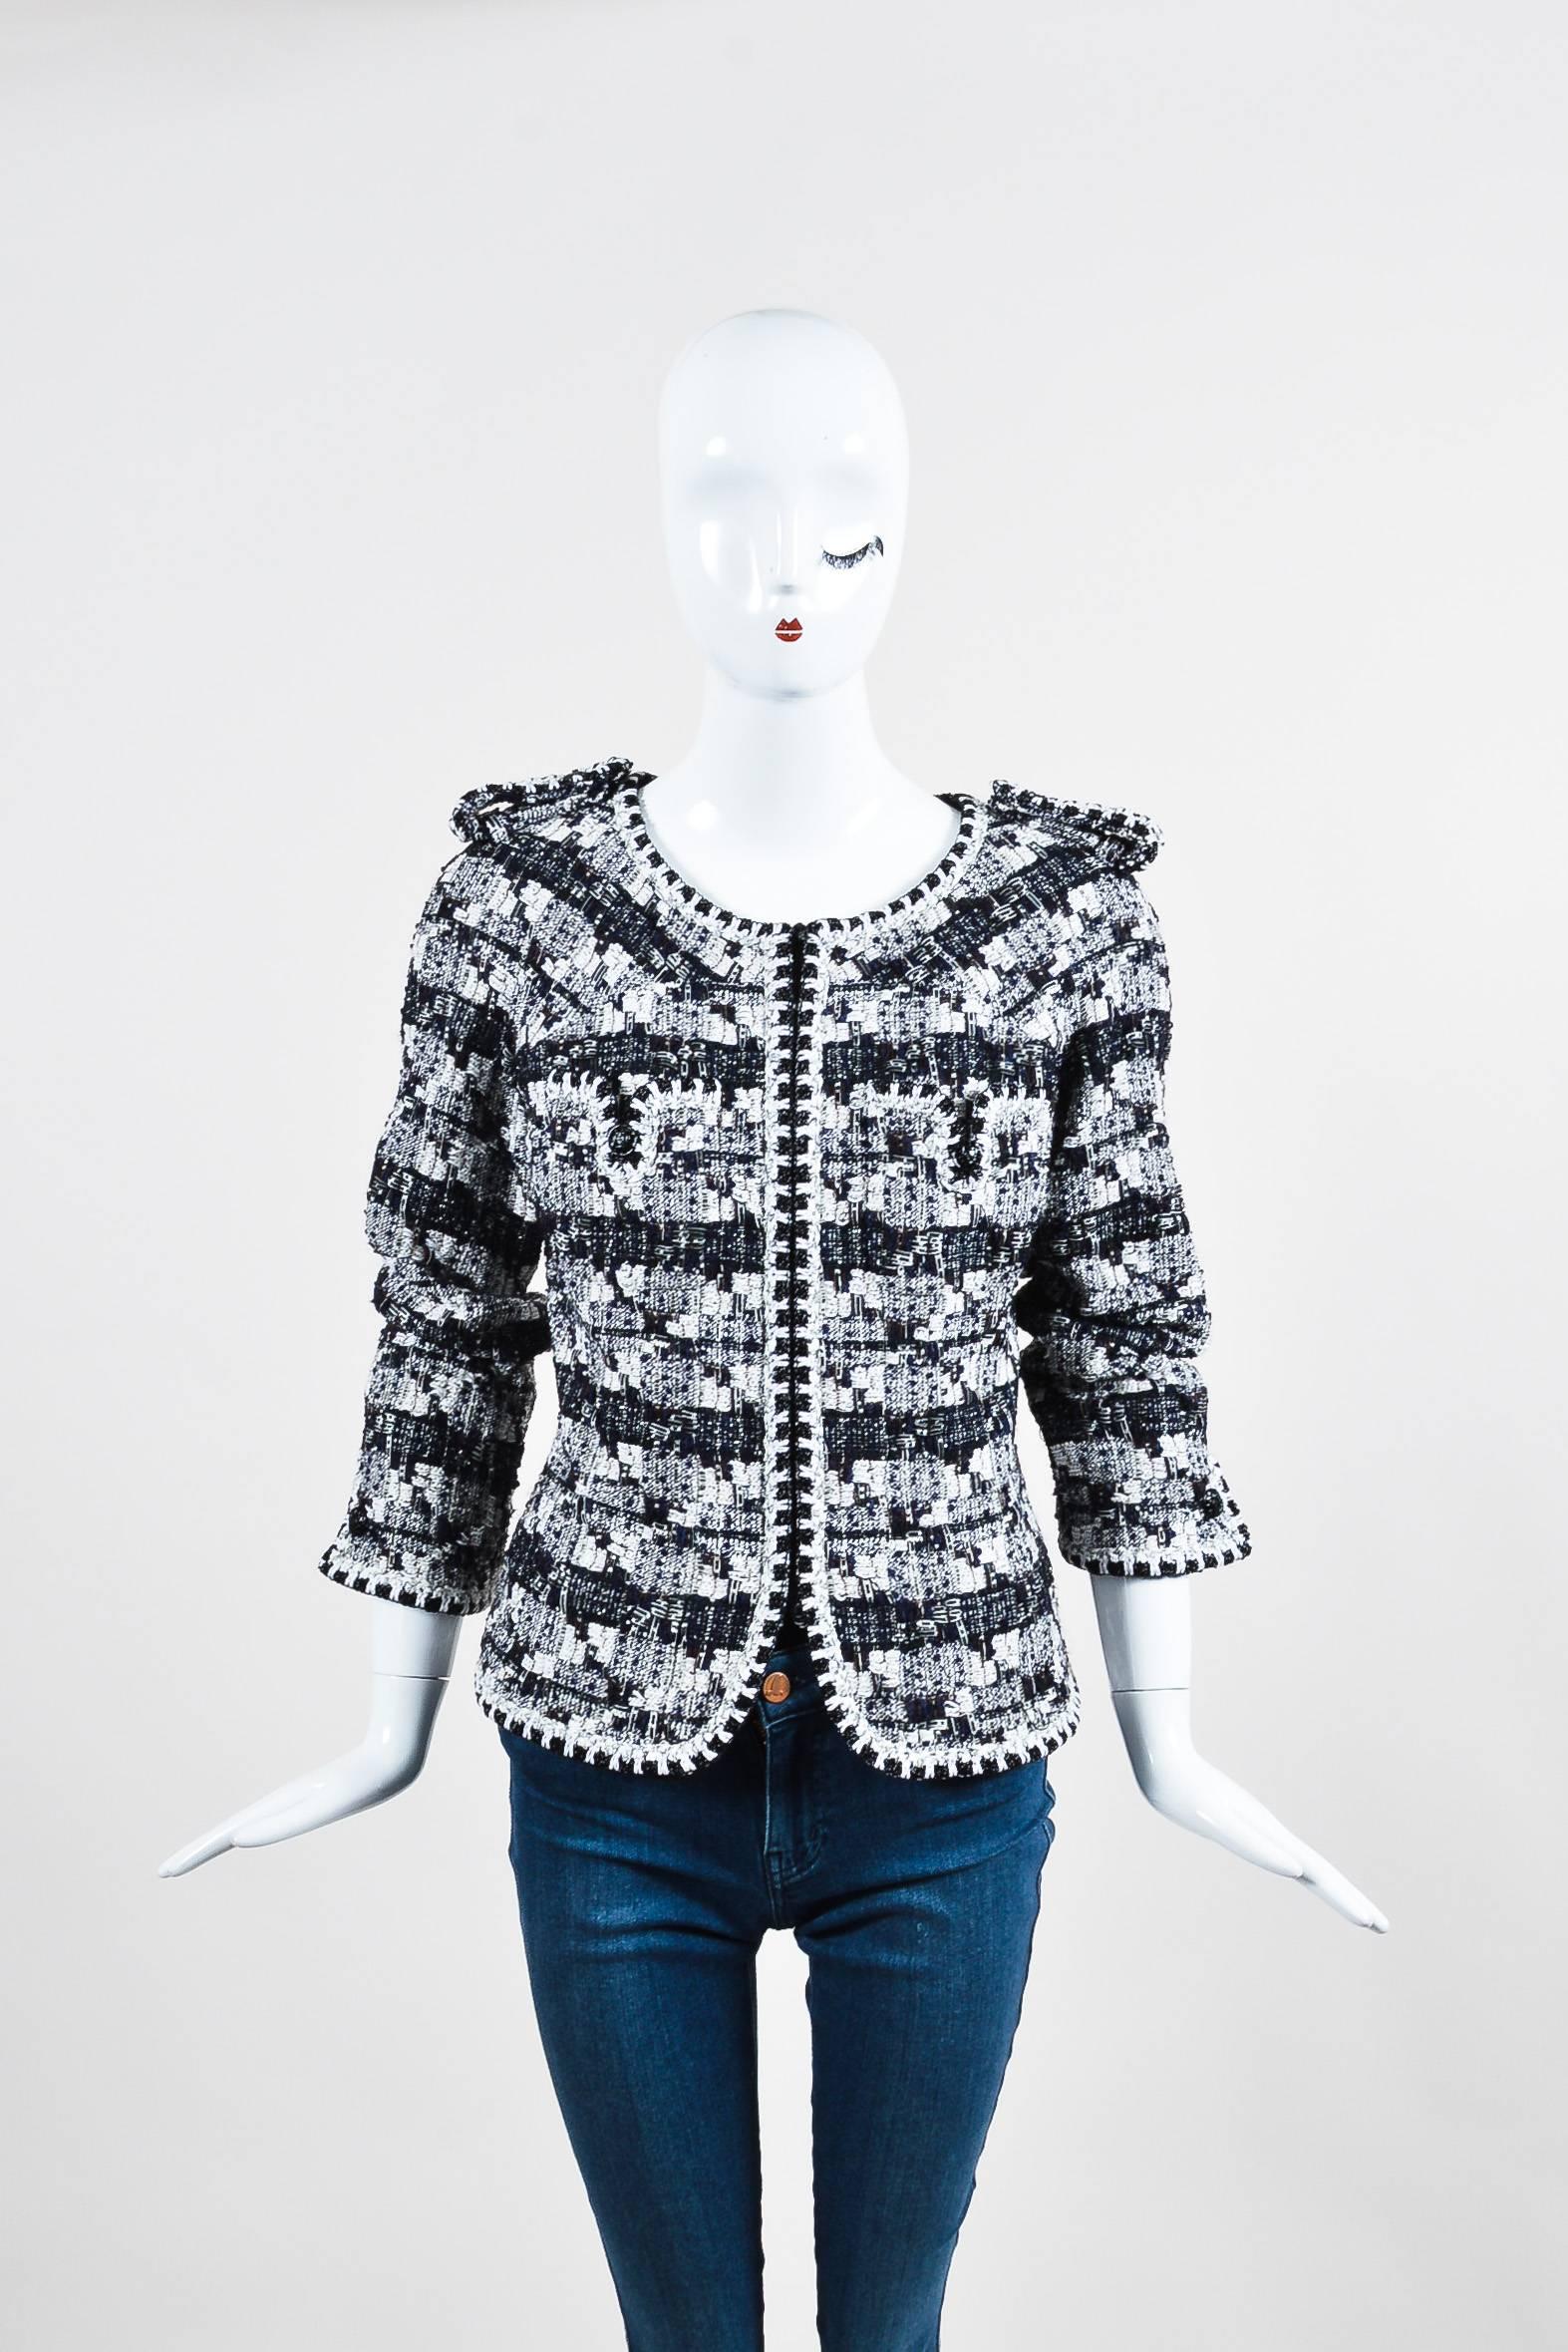 Black and white woven tweed jacket with touches of navy, brown, and metallic silver. Three quarter length sleeves. Collarless. Black bead trim. Decorative epaulets. Buttoned chest pockets. Black 'CC' logo buttons. Zips up front. Lined.

Additional